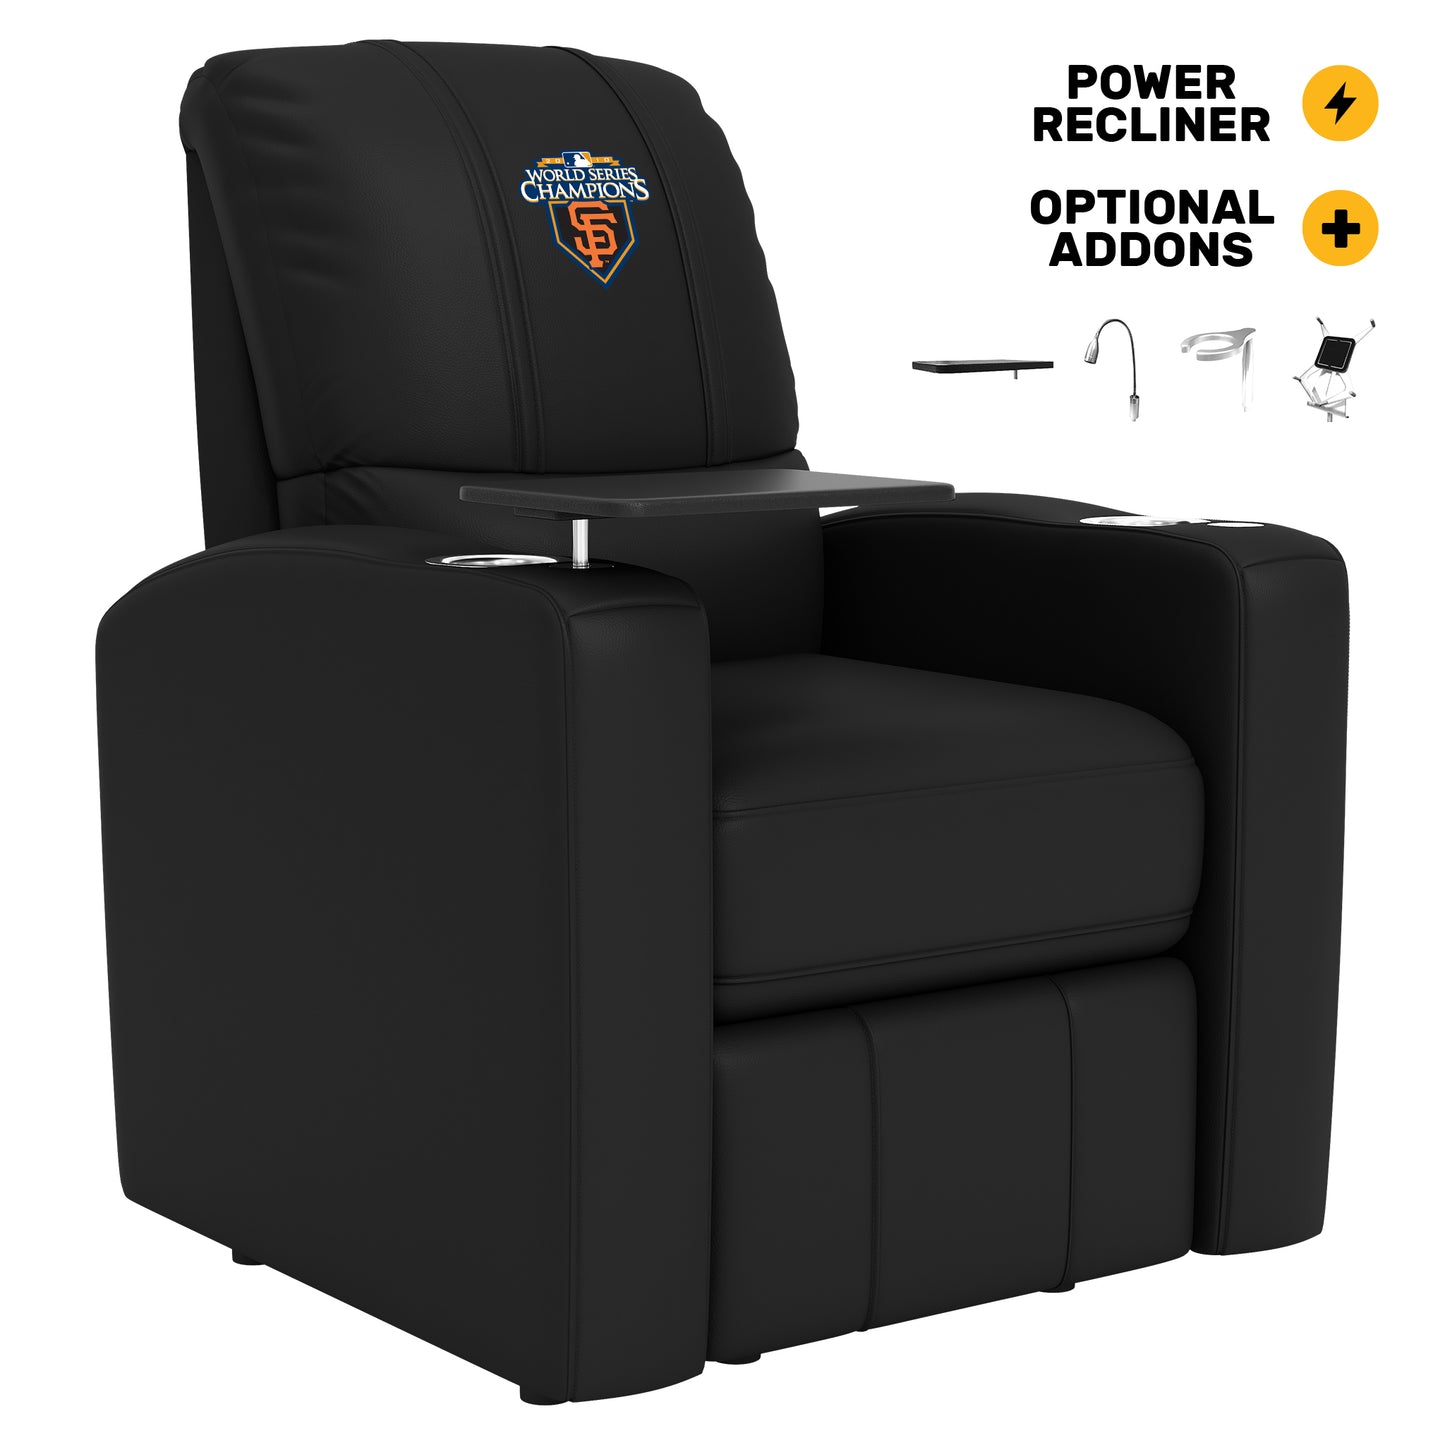 Stealth Power Plus Recliner with San Francisco Giants 2010 Champions